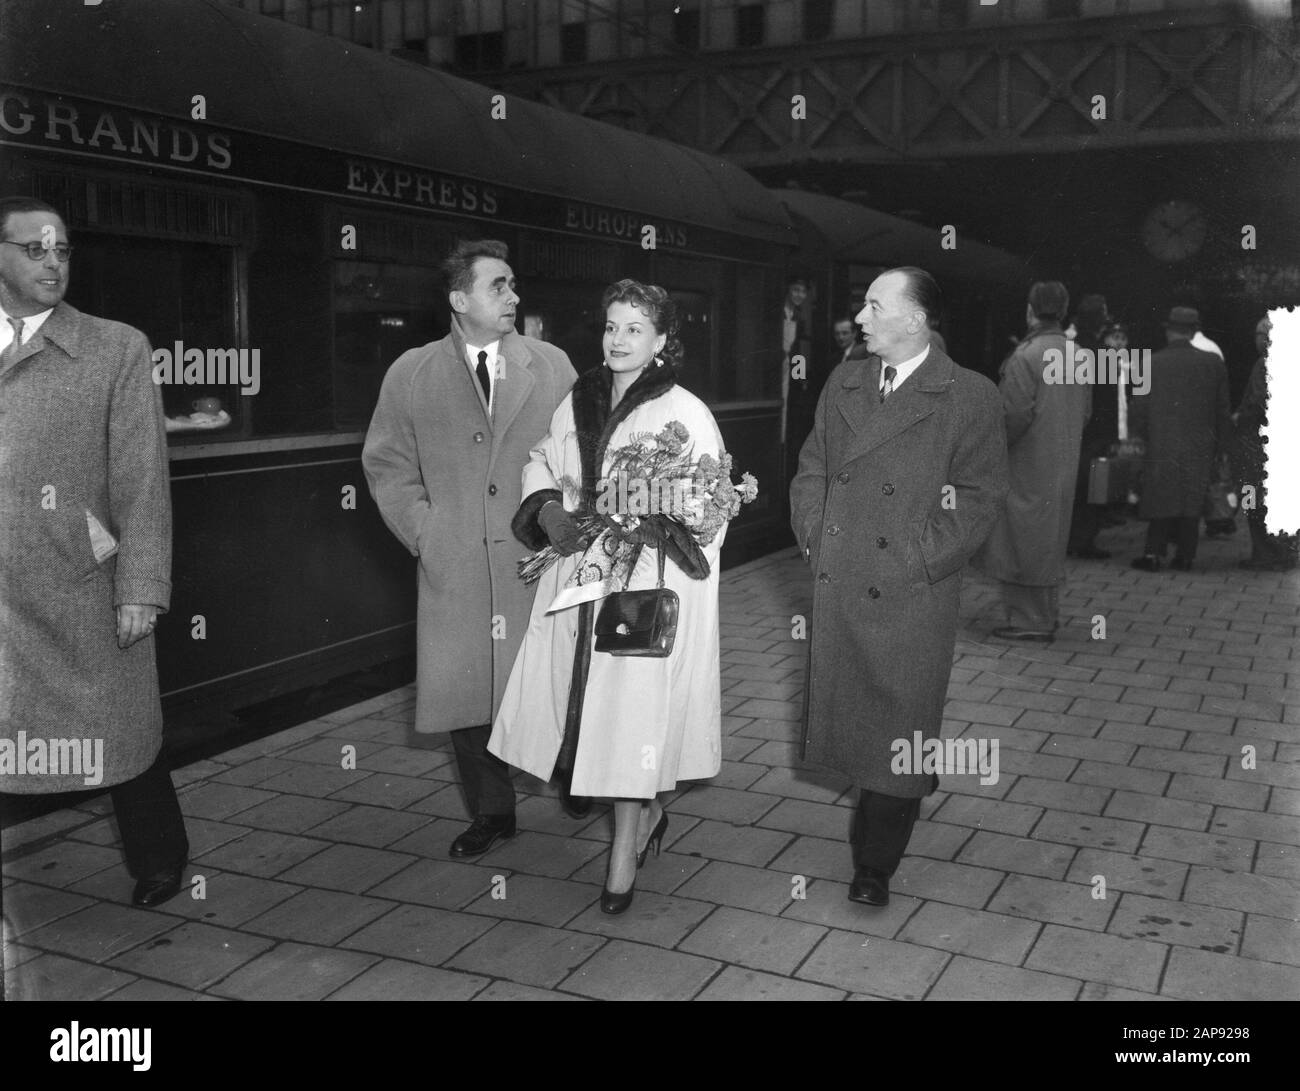 Arrival at Central Station of Henri George Clouzot with his wife Vera Annotation: Clouzot was a French film director, his wife an actress who played in three of his films Date: 18 November 1953 Location: Amsterdam Keywords: actresses, film directors, railways, stations Personal name: Clouzot-Gibson-Amiadi, Vera, Clouzot. Henri George Stock Photo